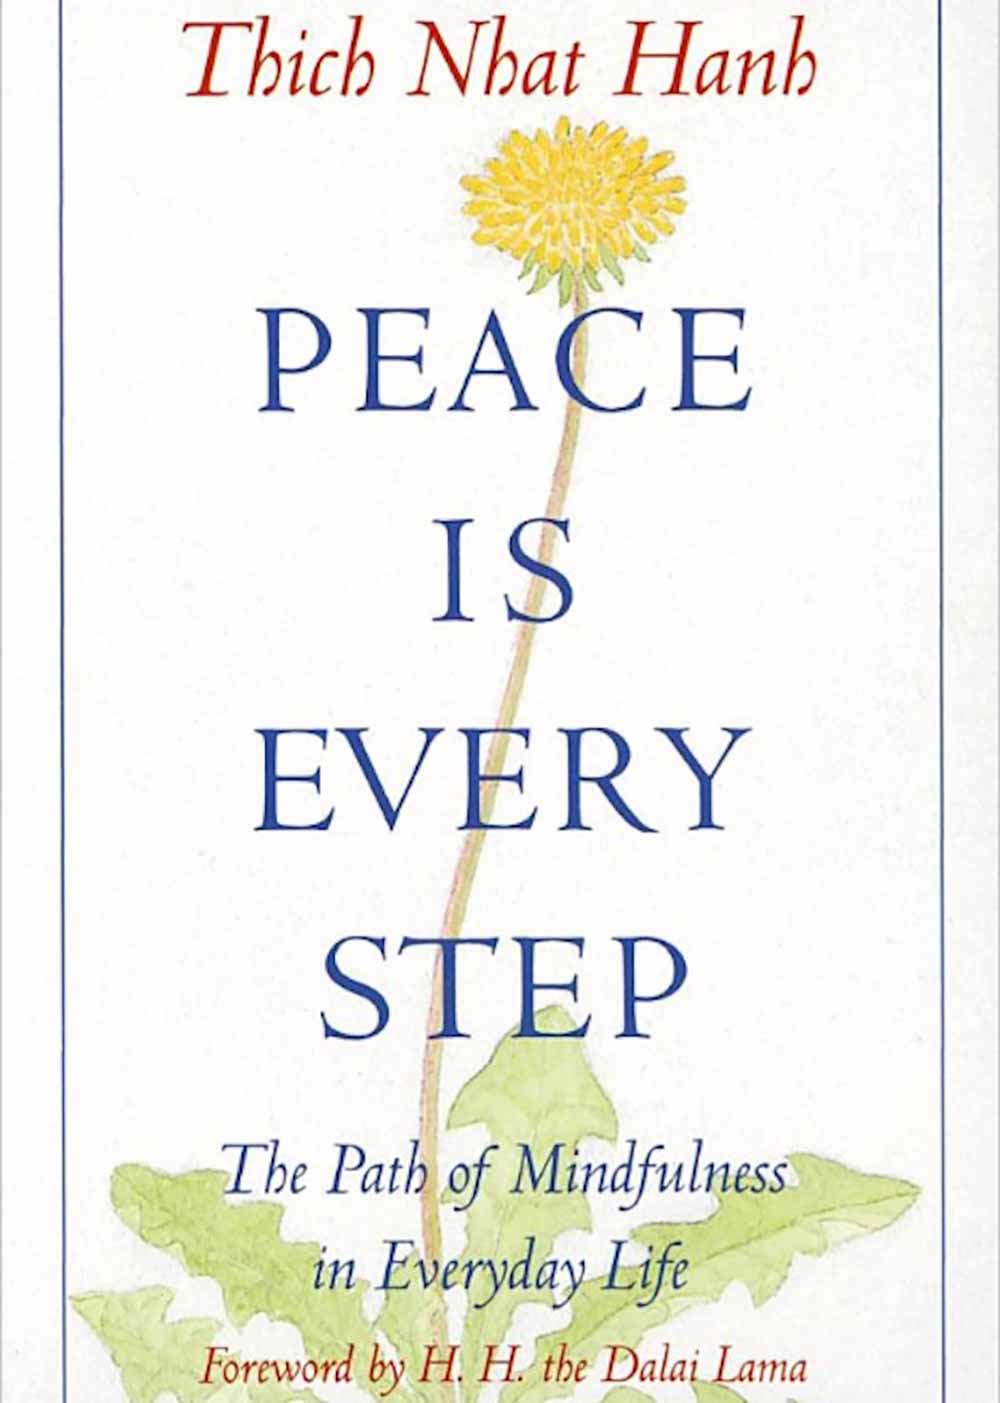 peace is every step - thich nhat hanh